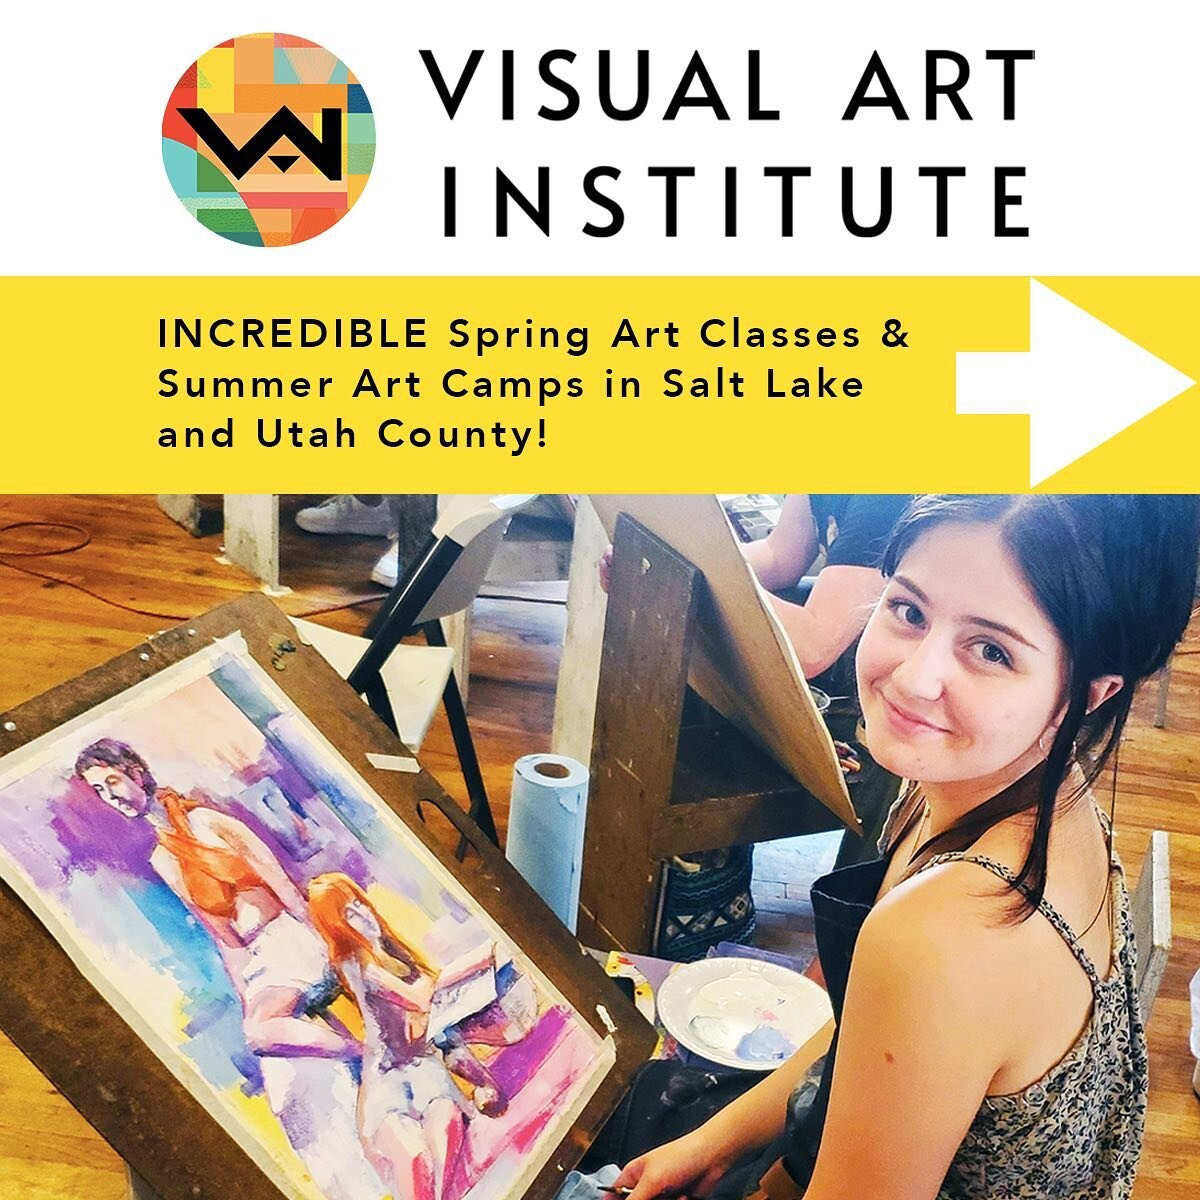 Looking for something exciting to do by yourself, or with friends? Or an awesome creative activity to engage your kiddos? Right now until March 31st, if you sign up for 2 or more art classes at @visualartinstitite, you&rsquo;ll snag a 20% discount on